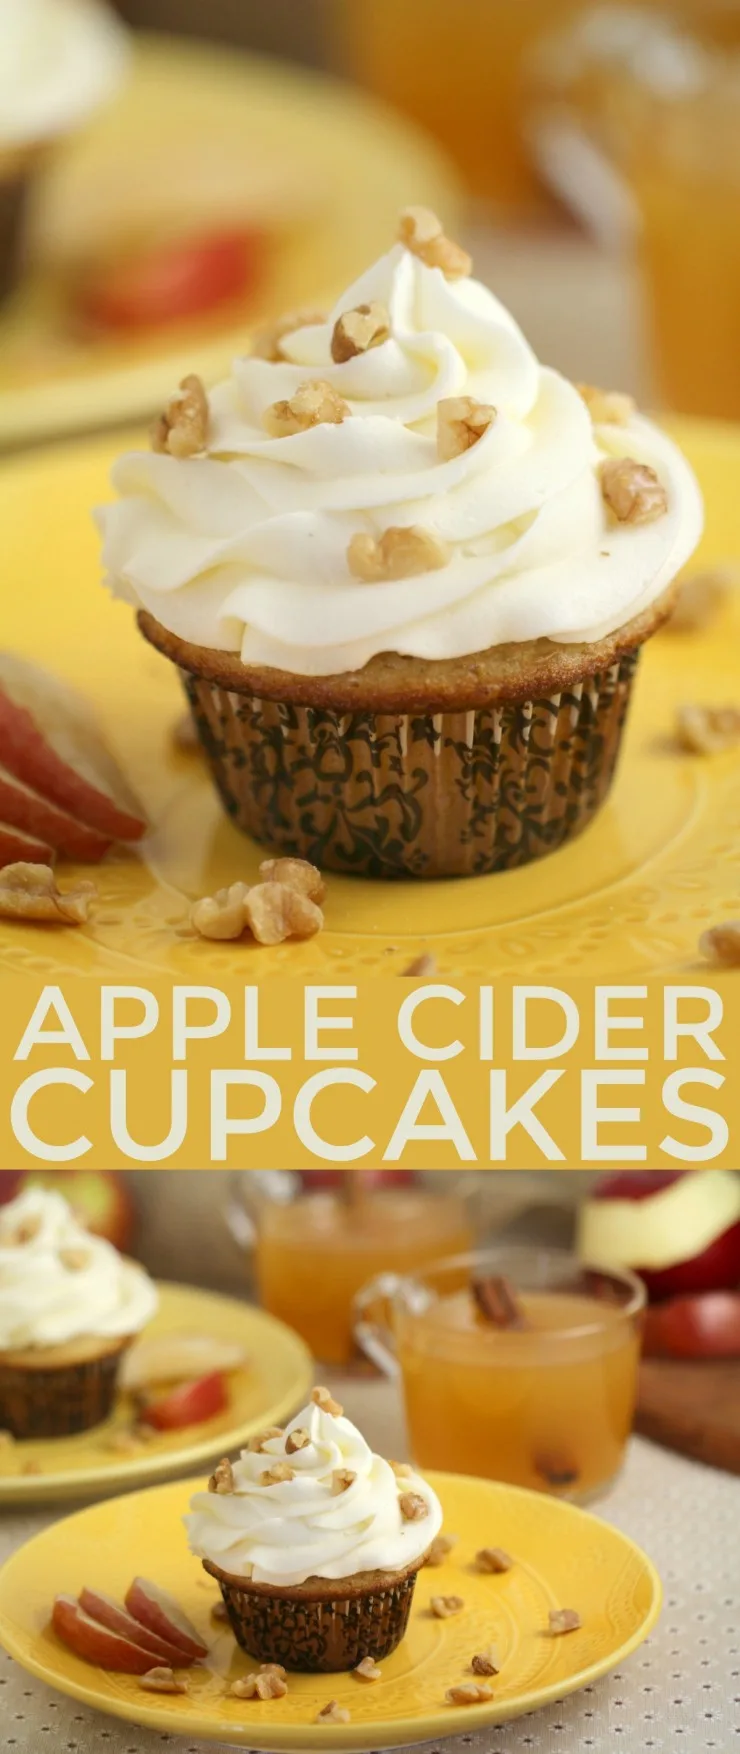 These Apple Cider Cupcakes are full of fall flavours - warm spices, apple cider, and walnuts come together in this sweet fall dessert. Can we talk about how perfect this and so beyond "pumpkin spice" for fall? Yeah. I went there. These cupcakes are way yummier, and good enough to be Thanksgiving dessert!. 